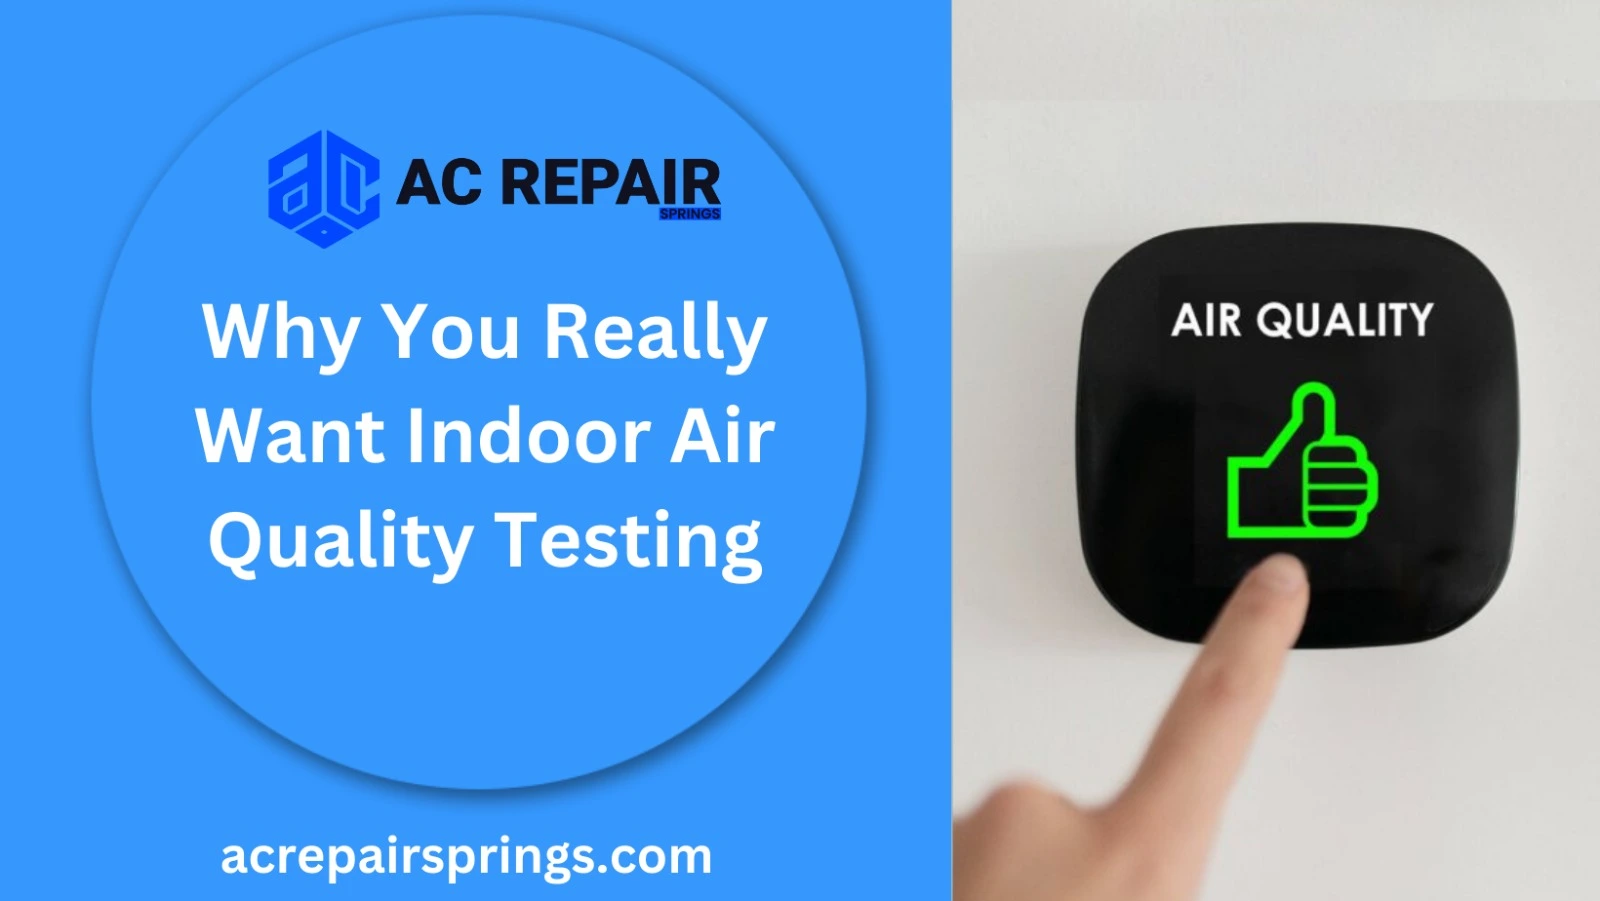 Why You Really Want Indoor Air Quality Testing